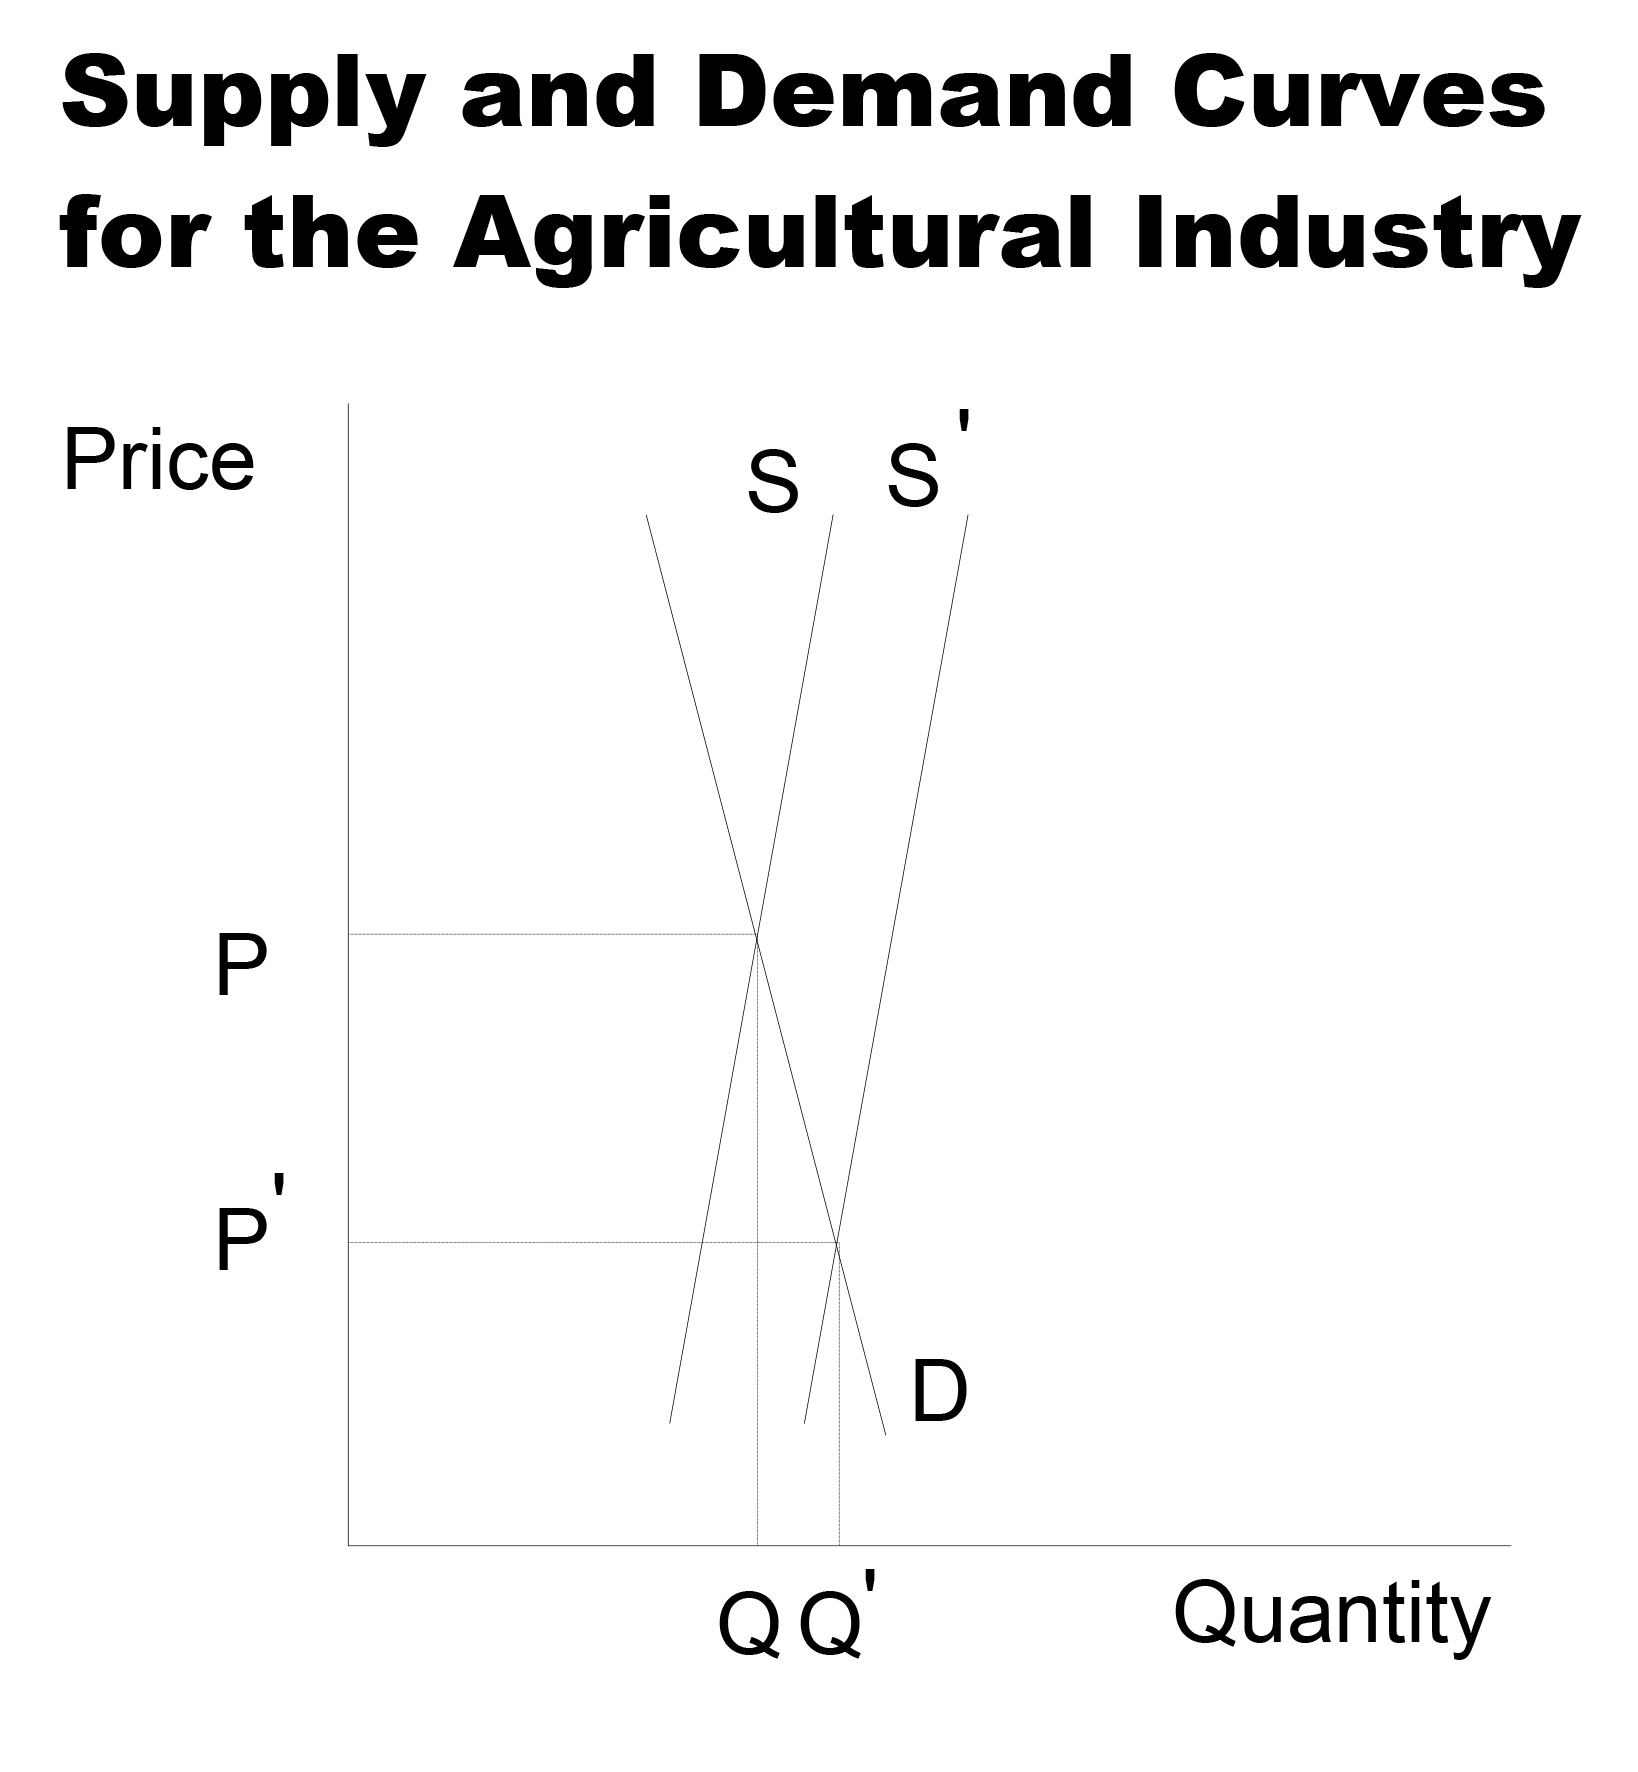 Supply and Demand Curves for the Agricultural Industry